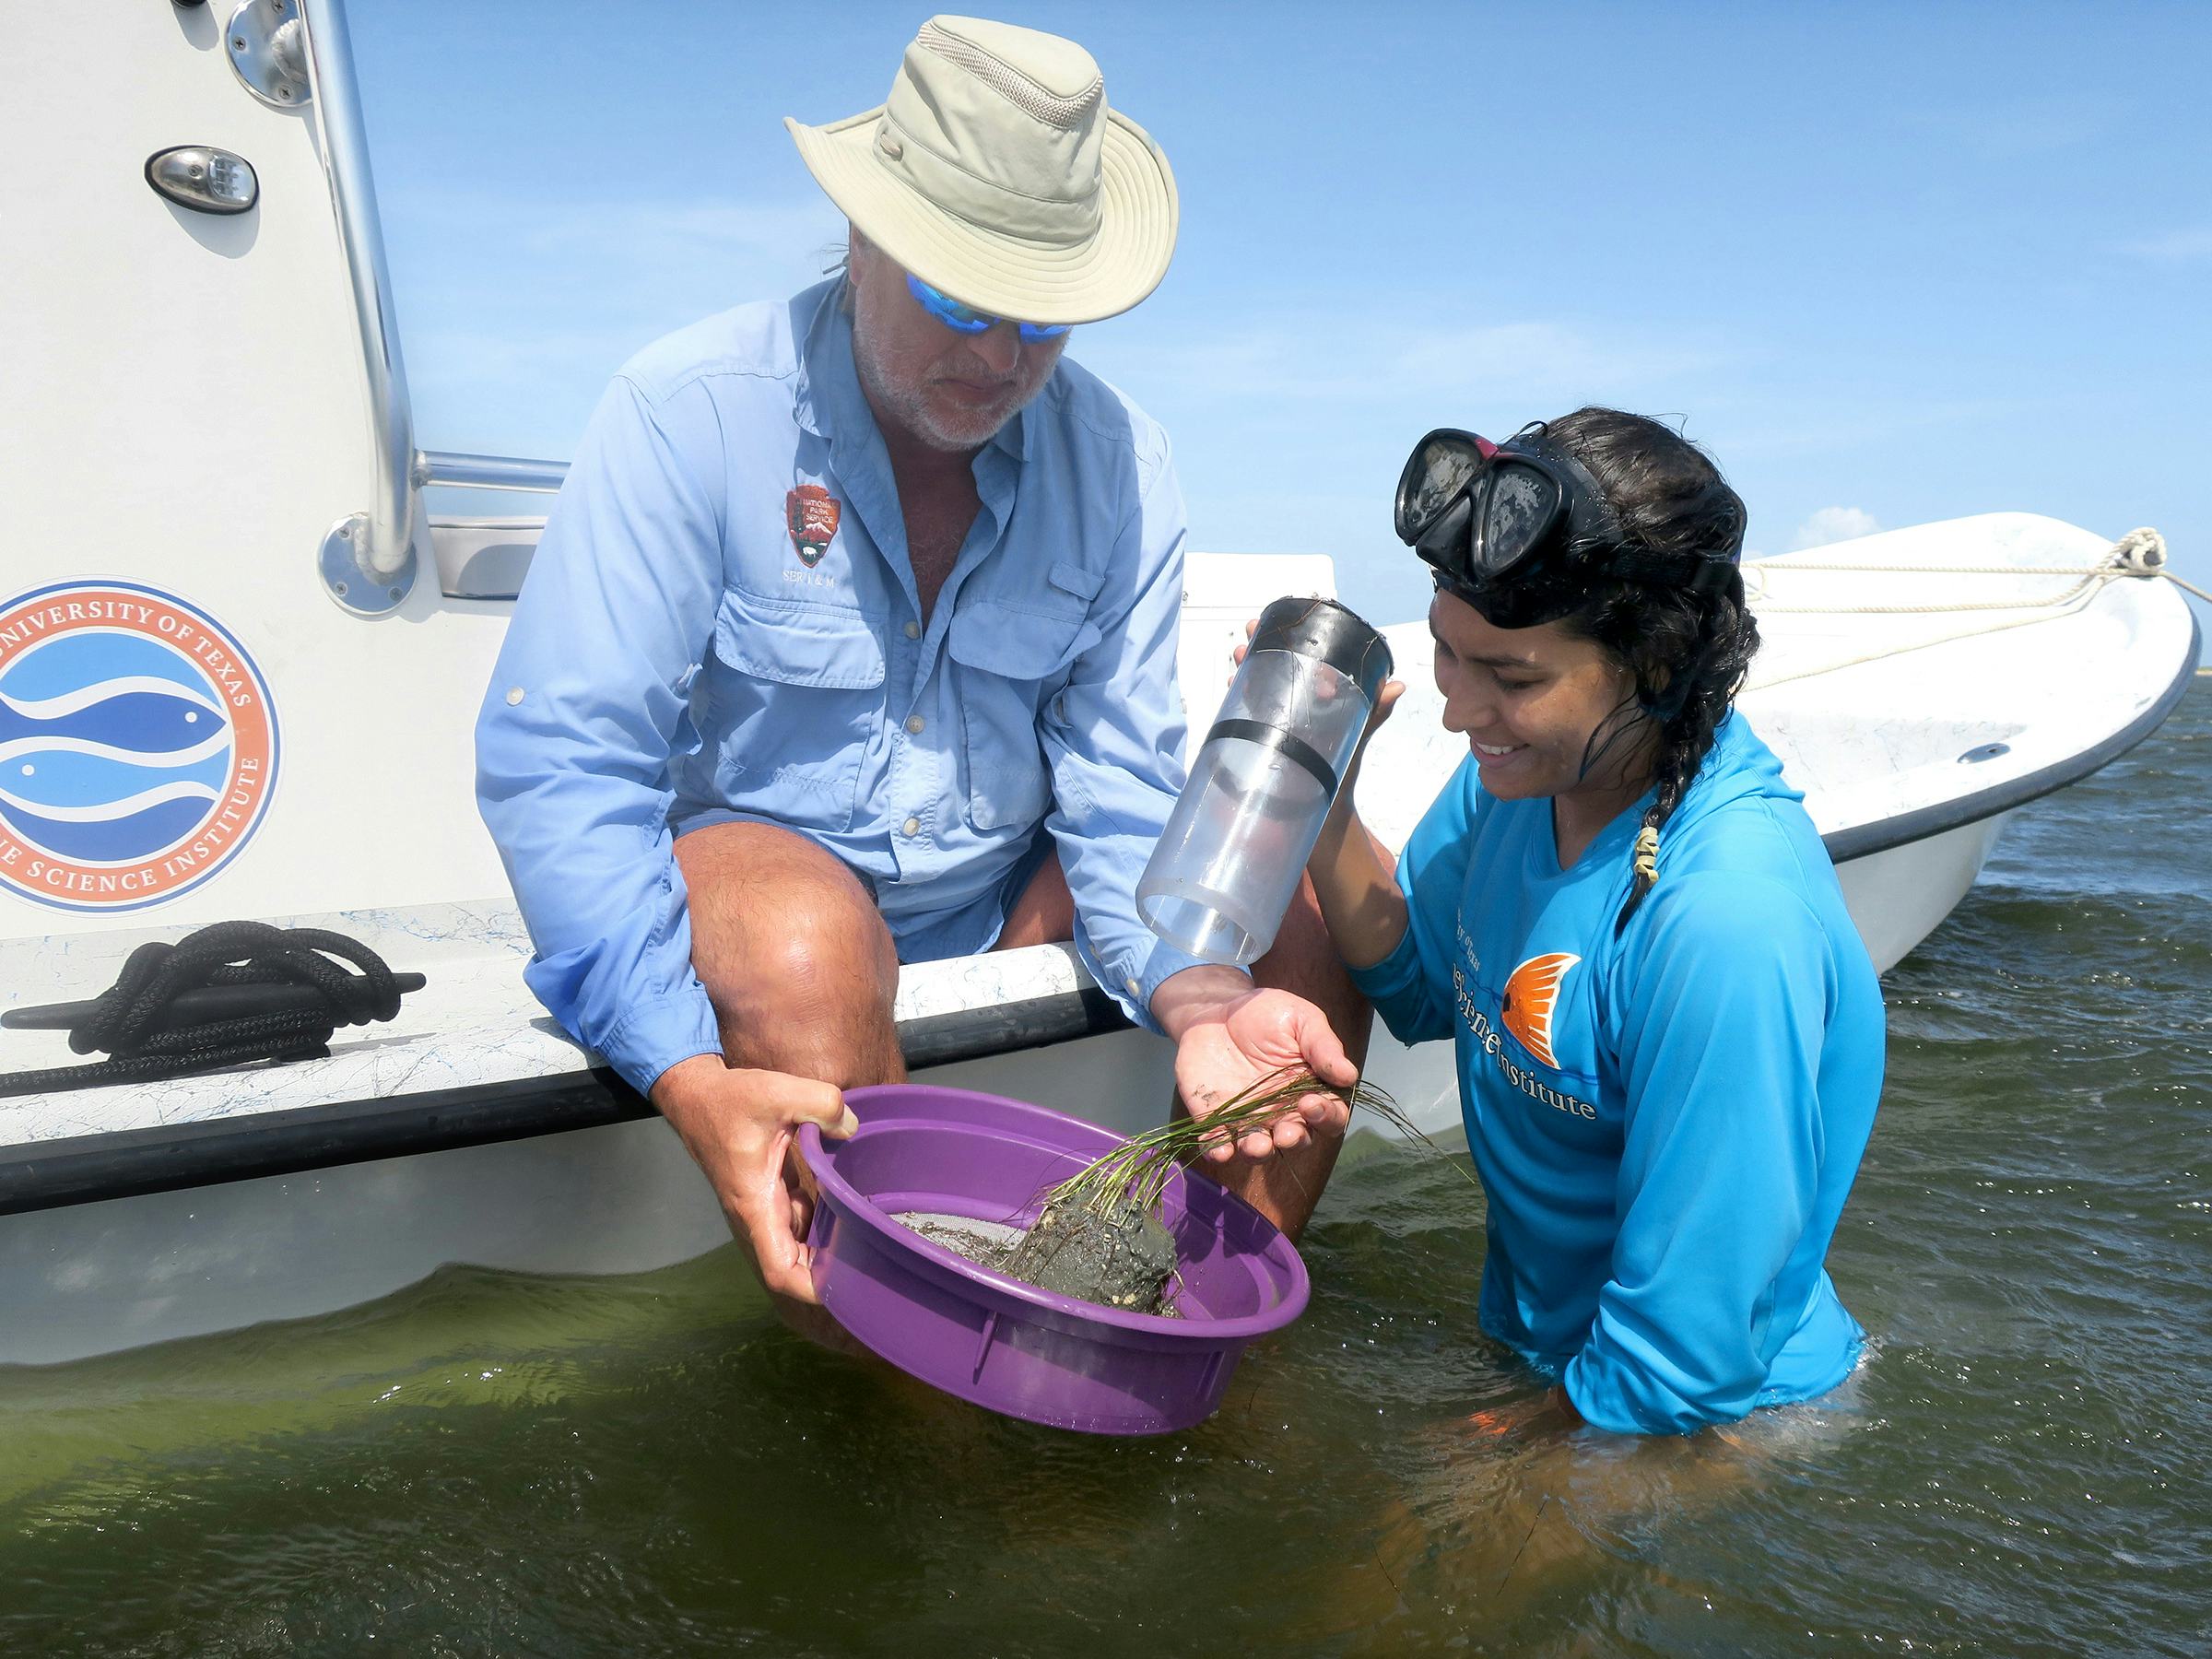 People obtaining plant samples from the water near Port Aransas, TX.